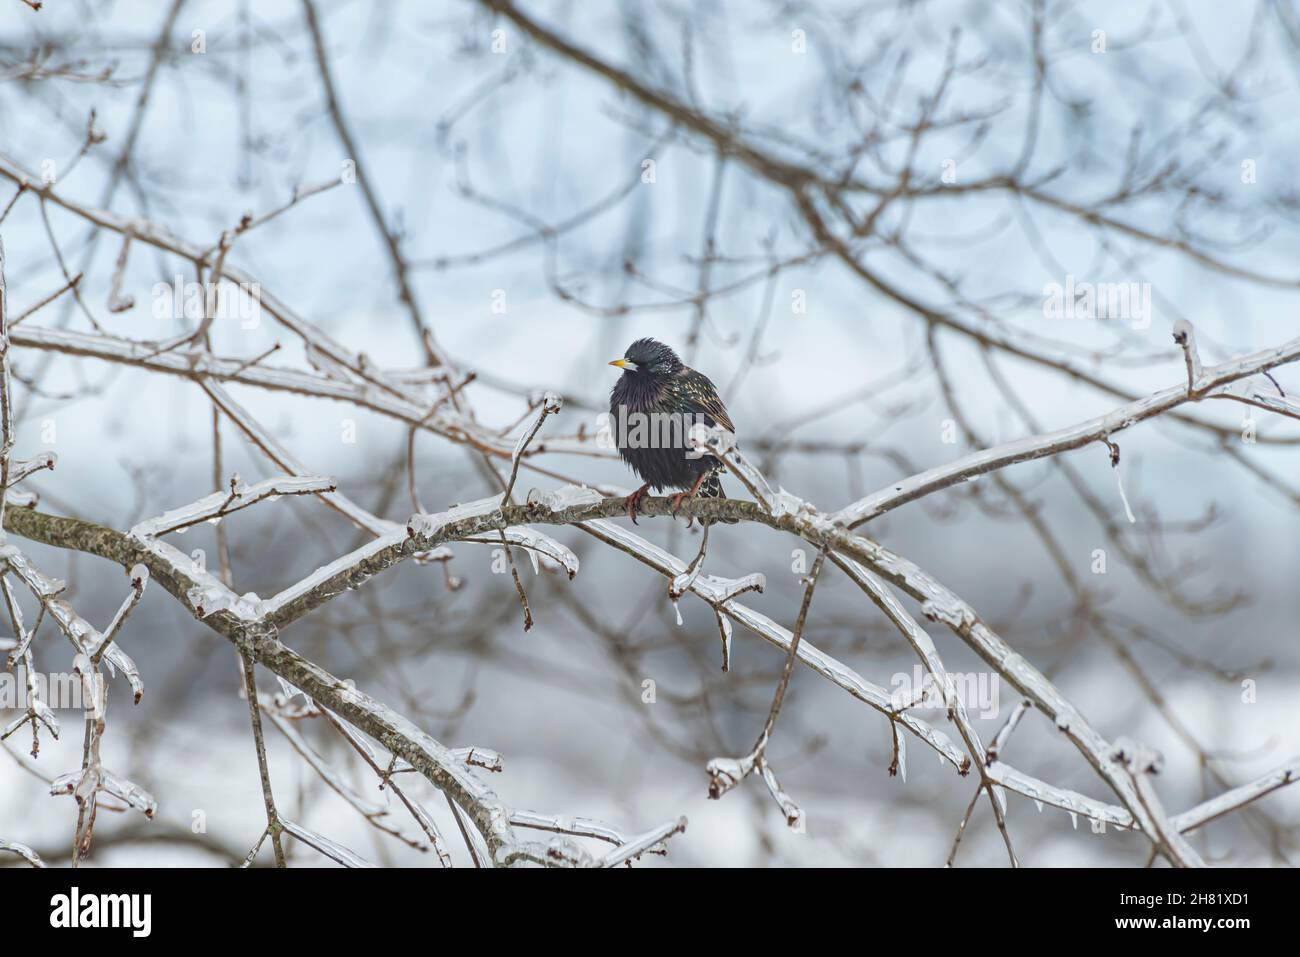 Common starling (Sturnus vulgaris) perched on a icy tree branch in winter Stock Photo